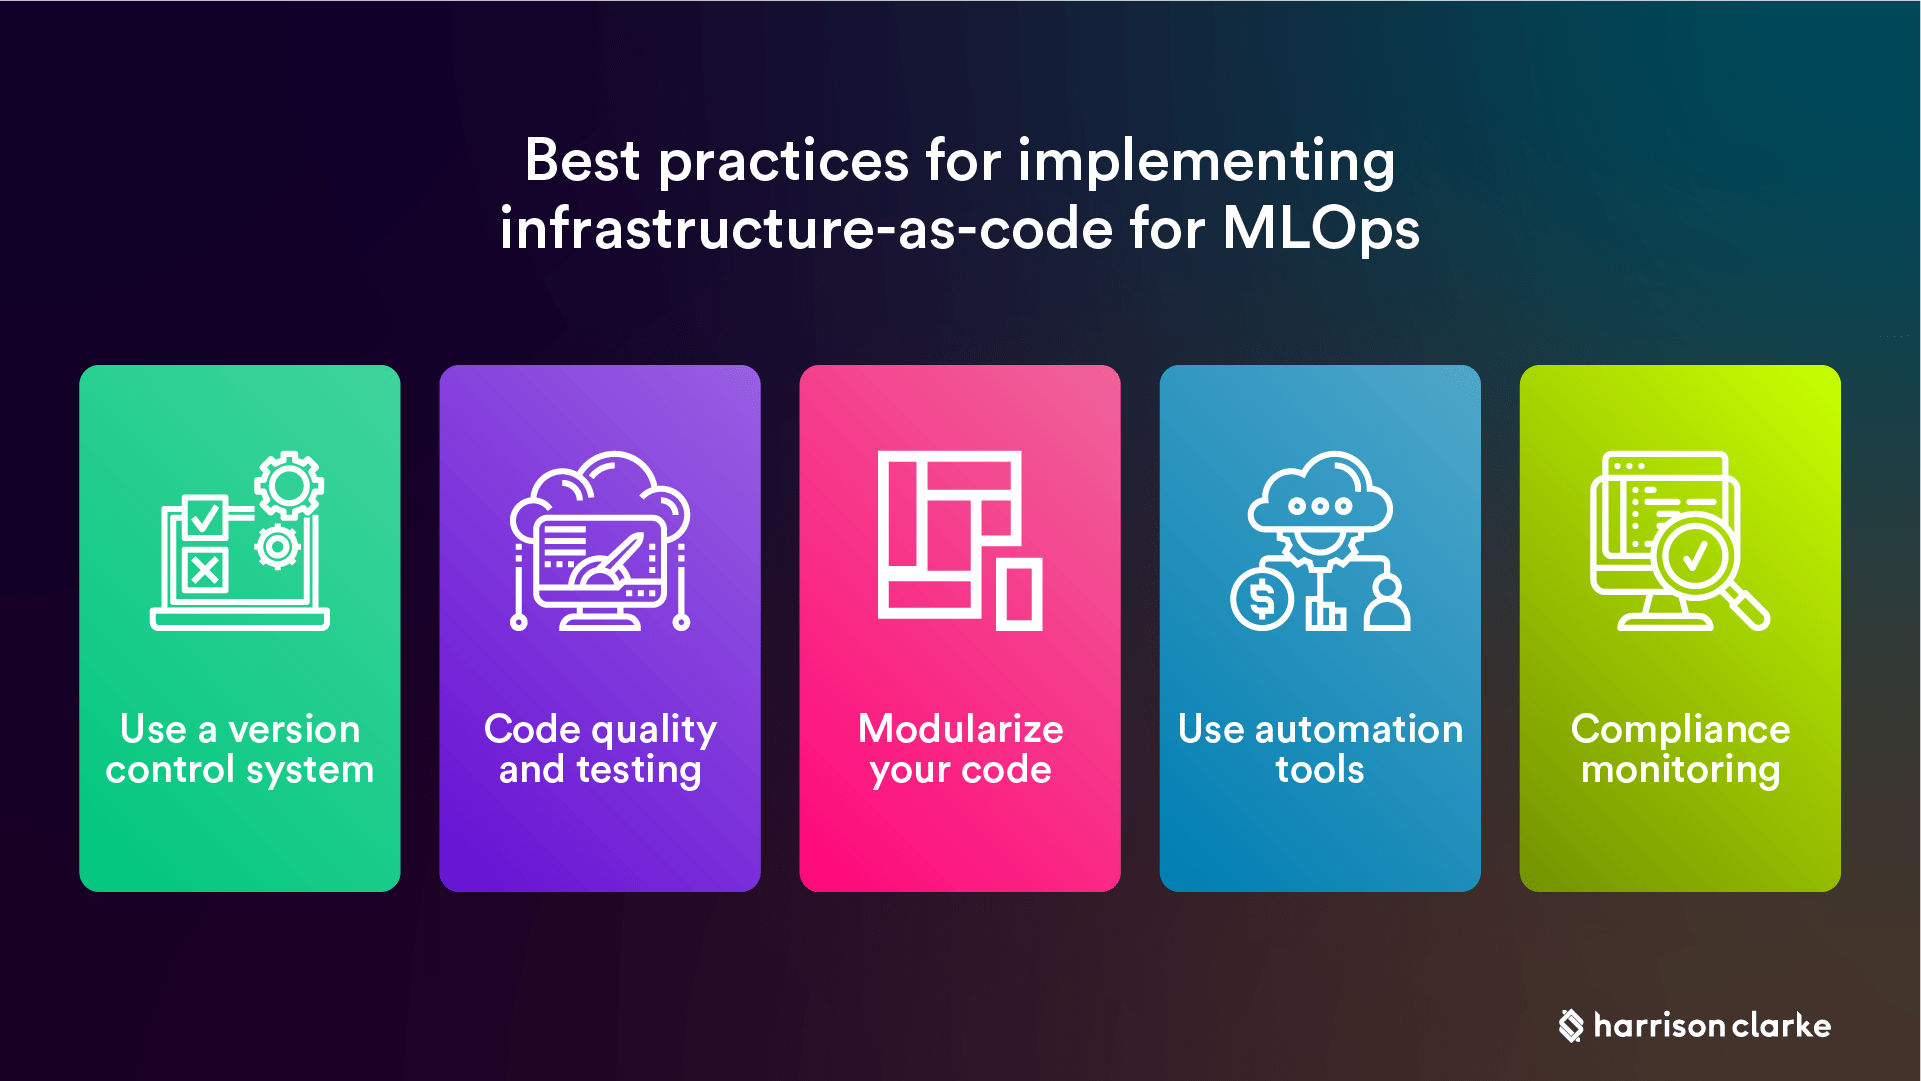 Best practices for implementing infrastructure-as-code for MLOps